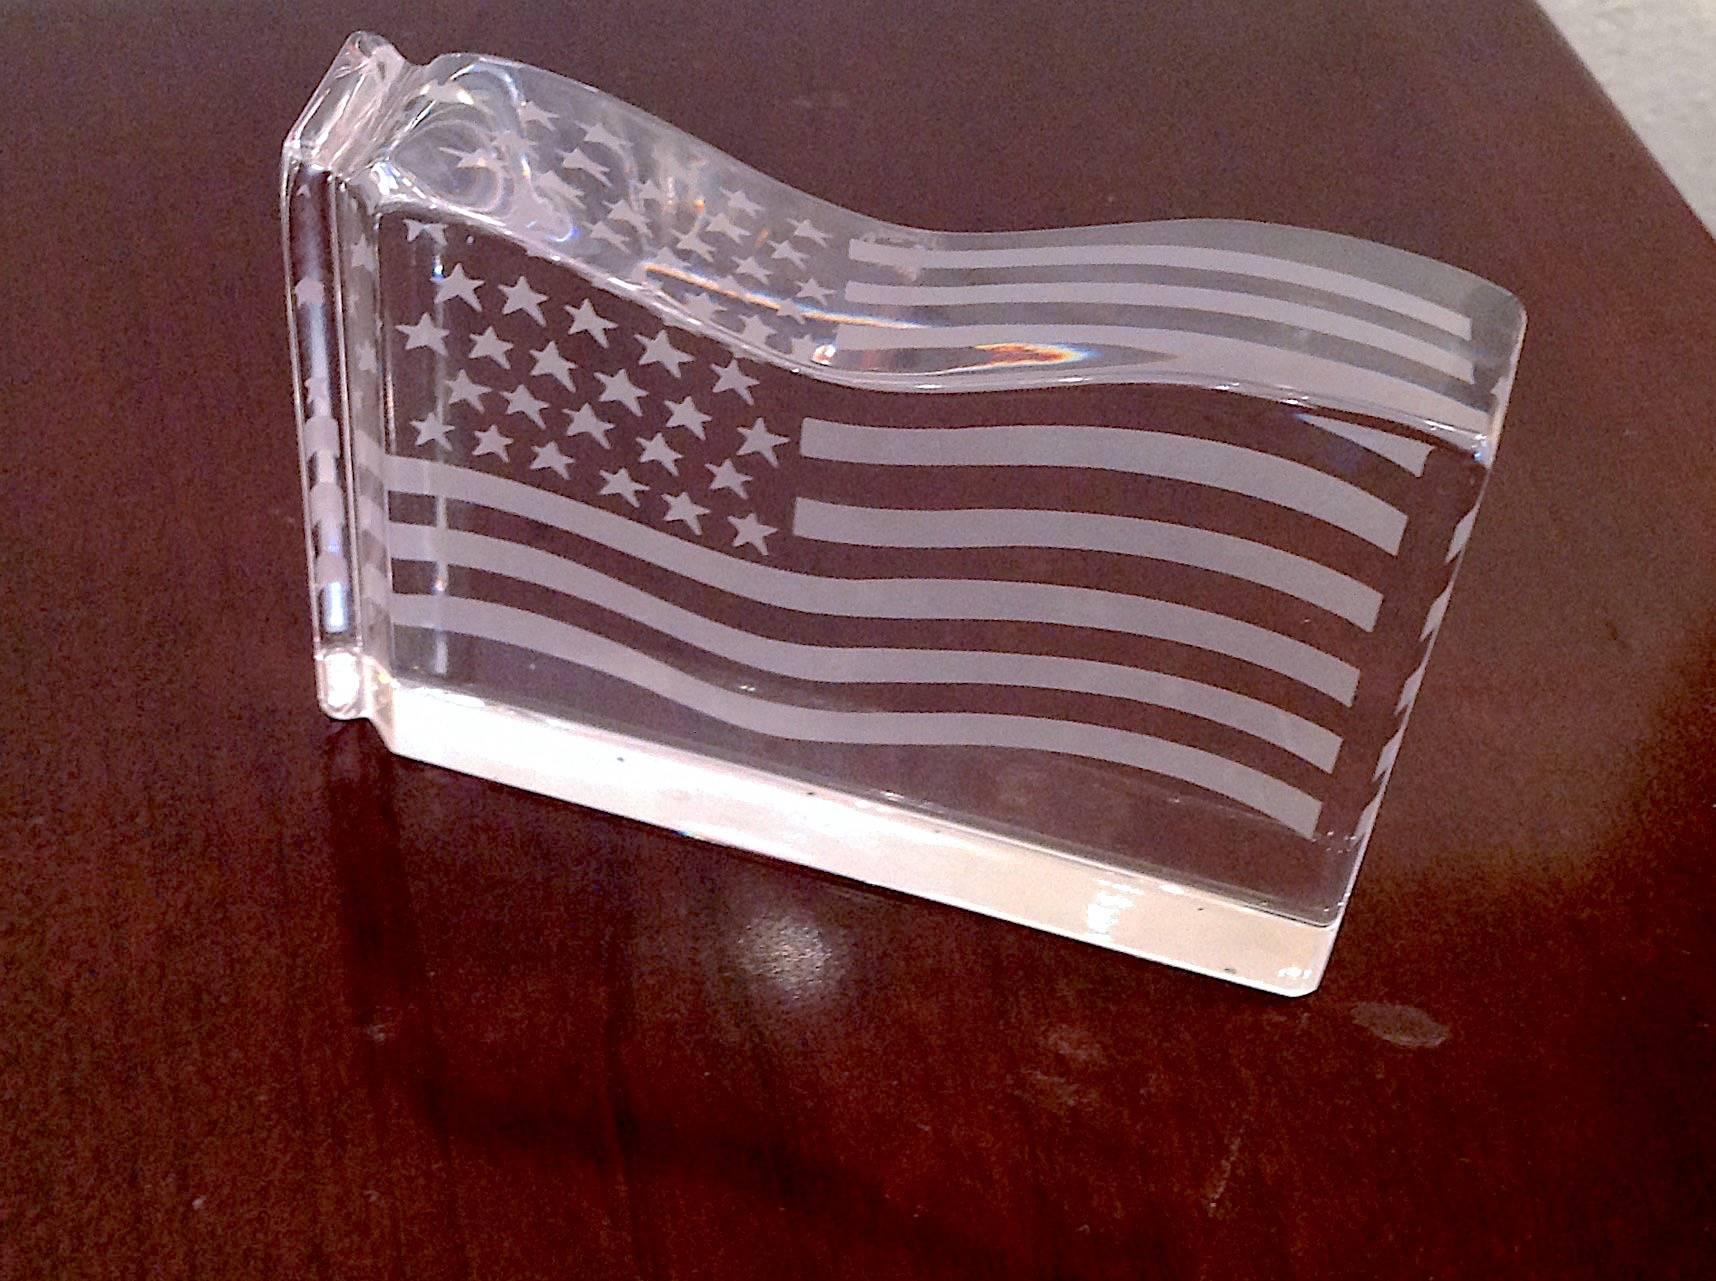 Tiffany & Co. American Flag Crystal Paperweight In Excellent Condition For Sale In Mobile, AL